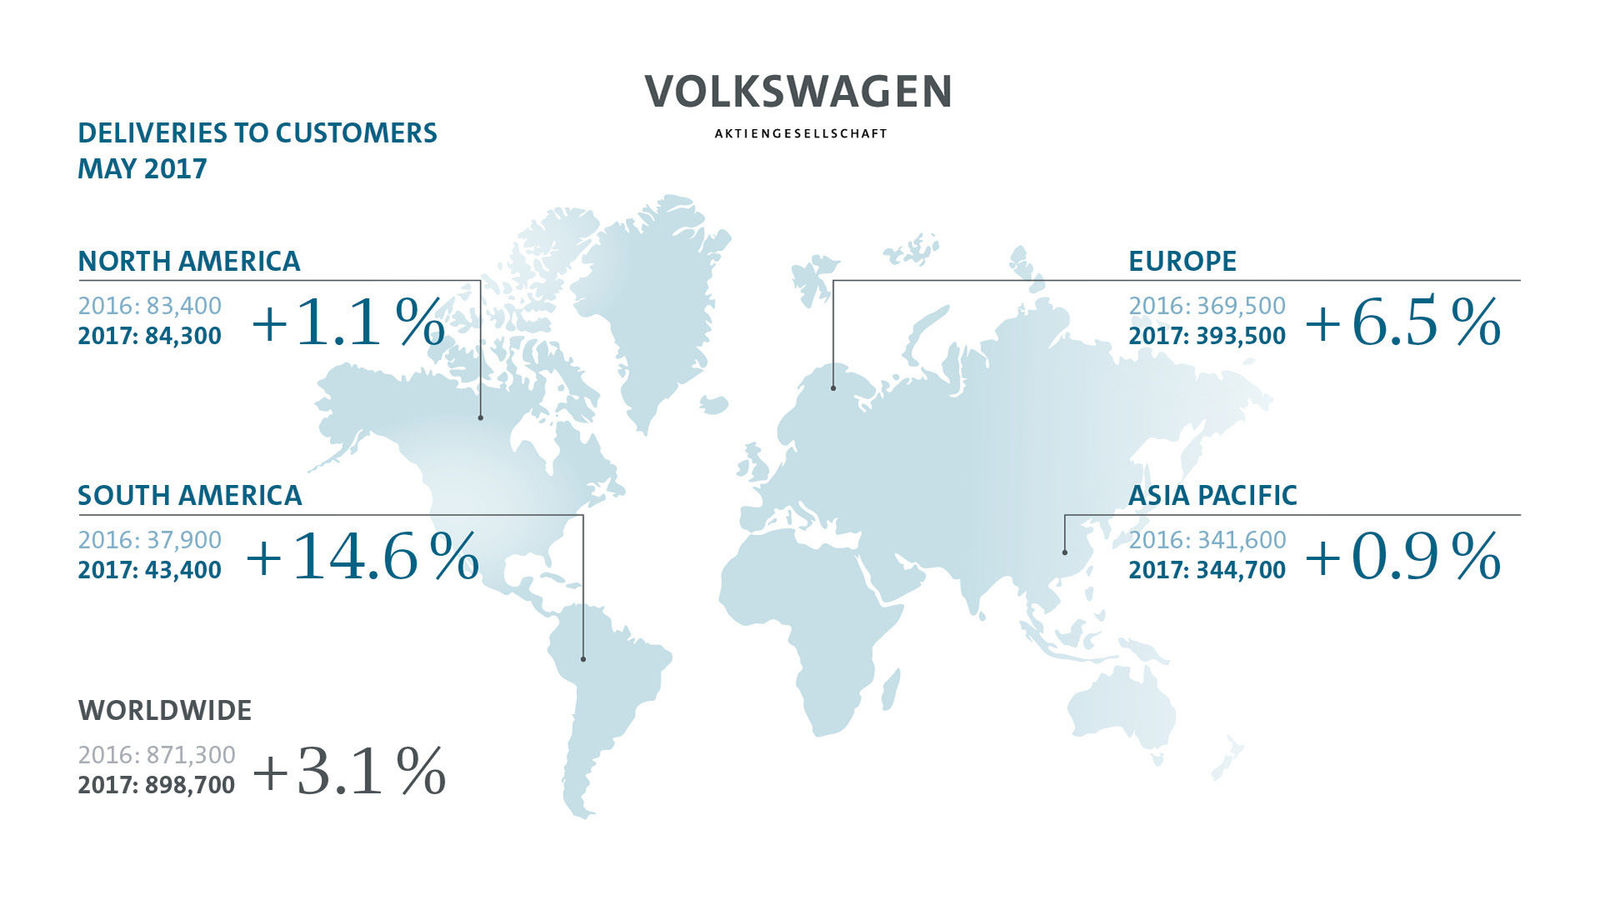 Volkswagen Group delivers 899,000 vehicles in May